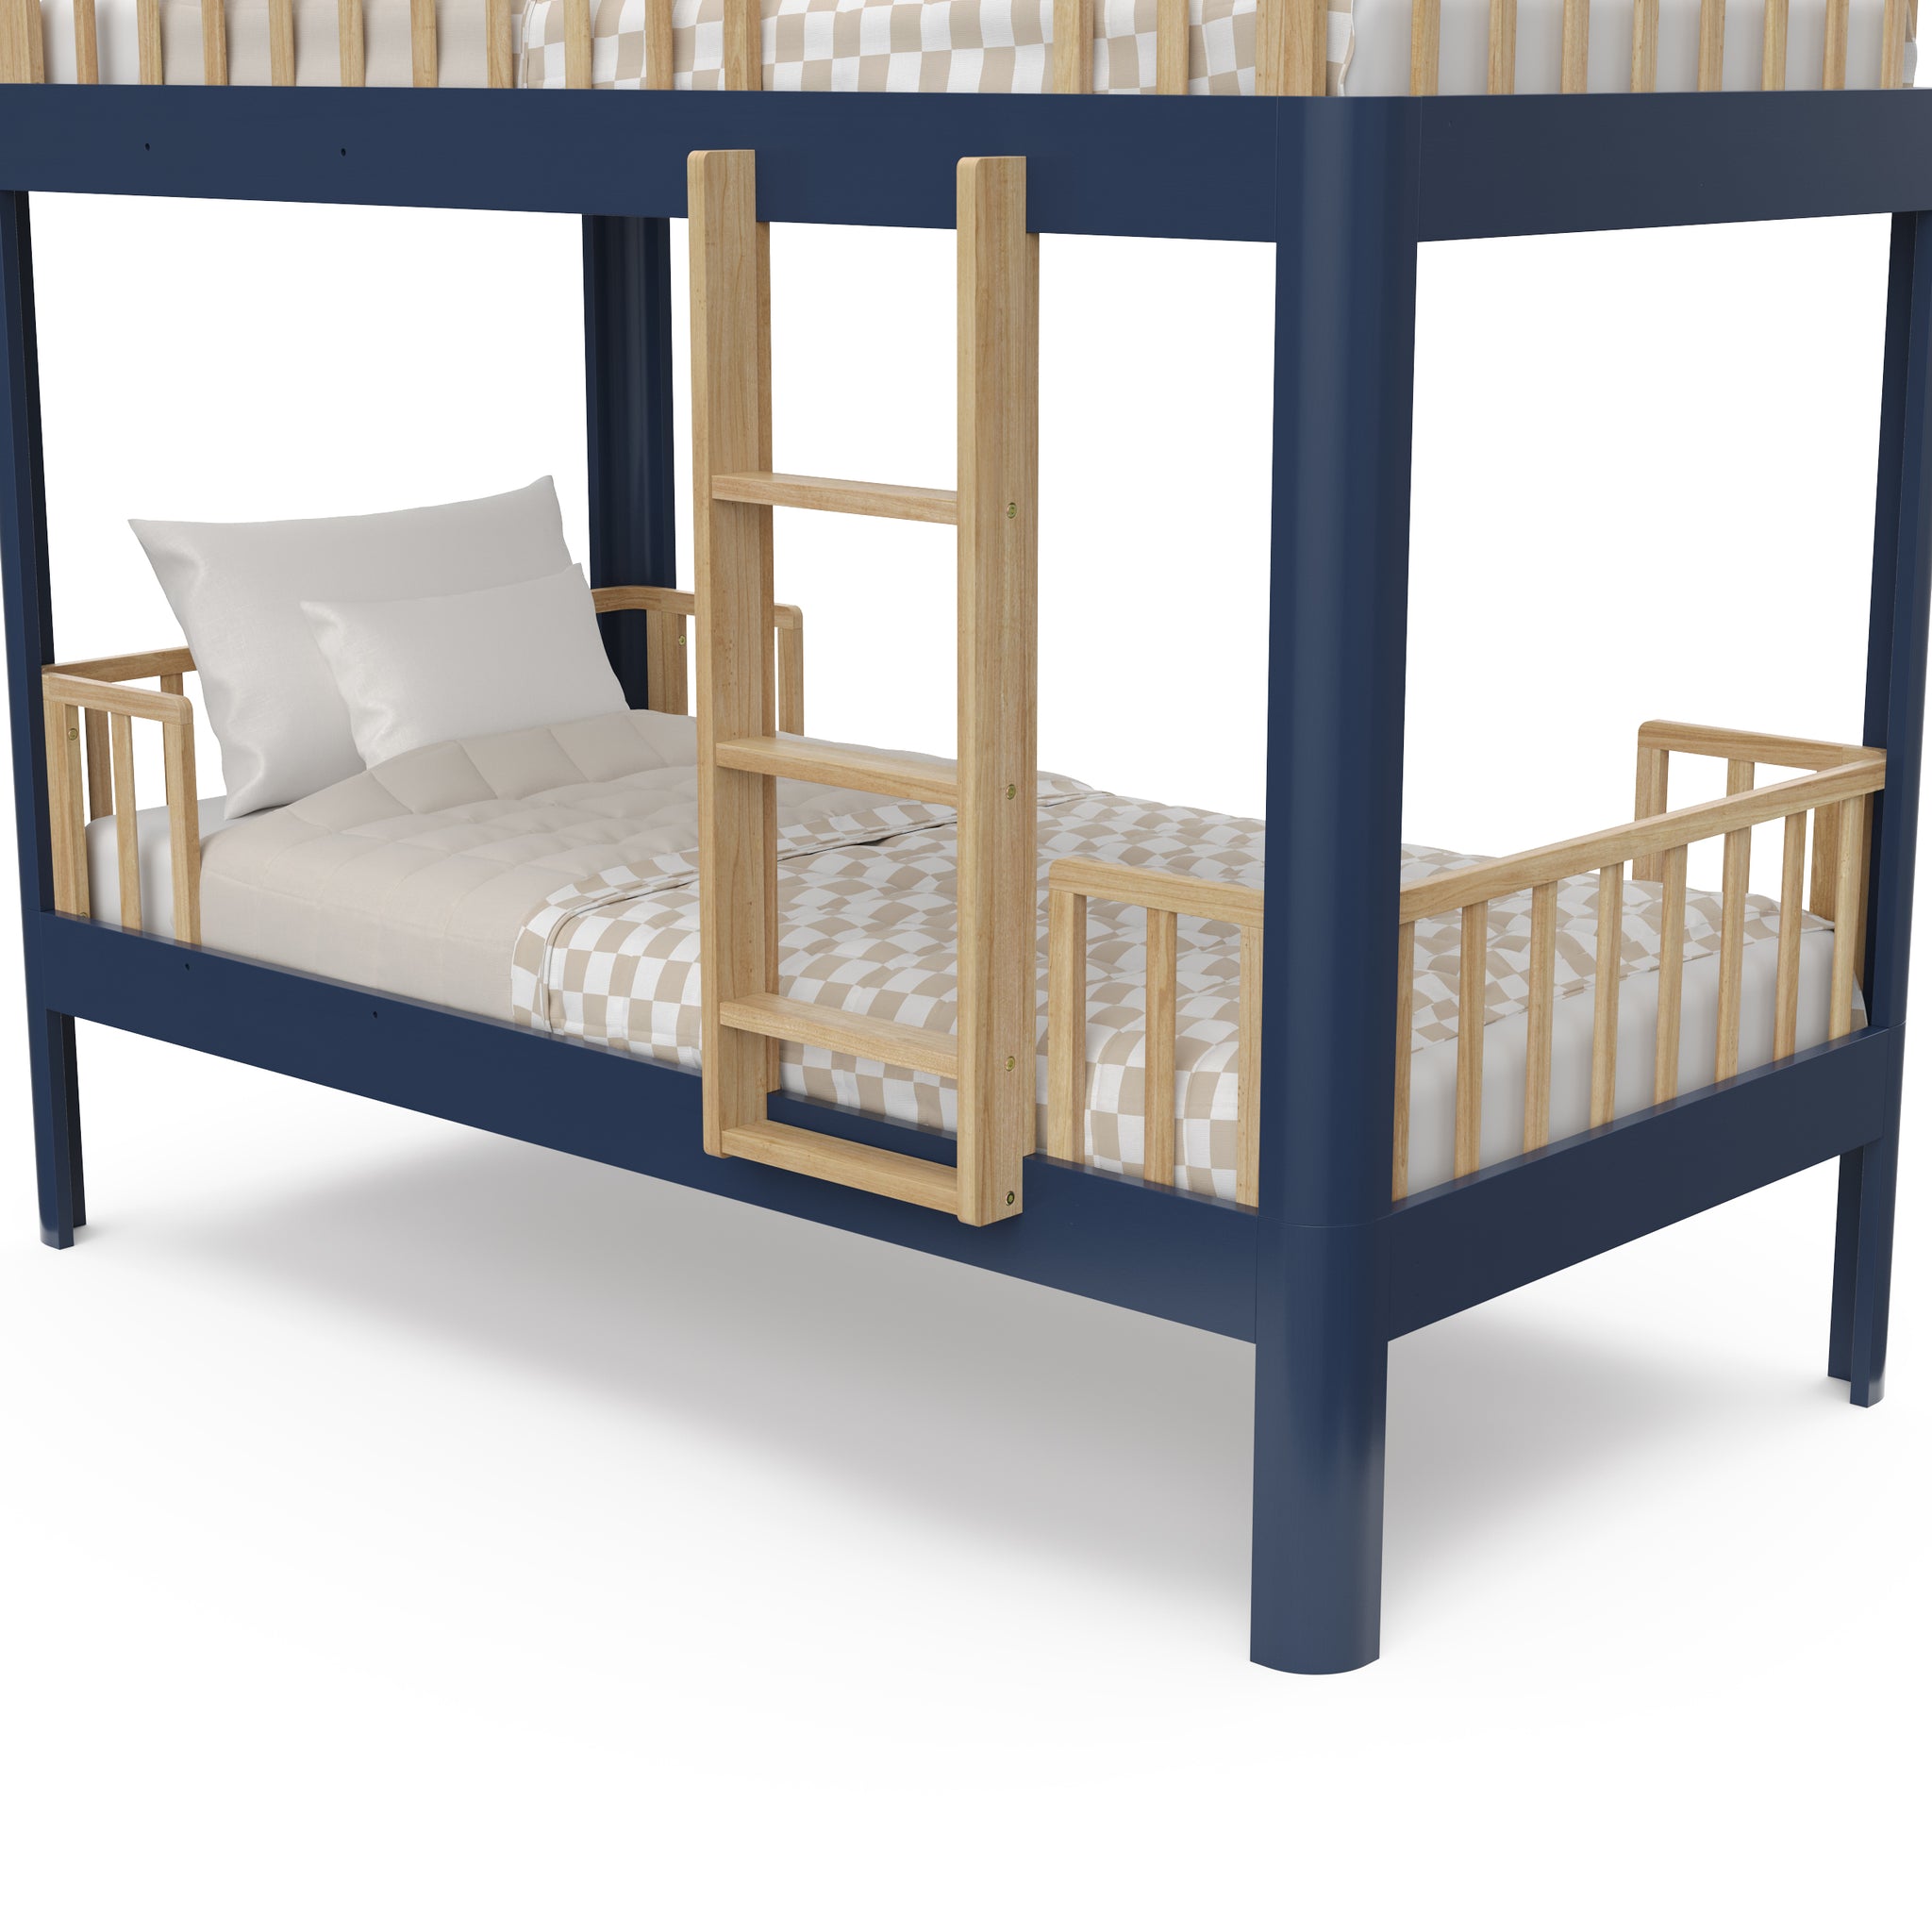 Close up view of natural wood  and blue bunk bed with bedding